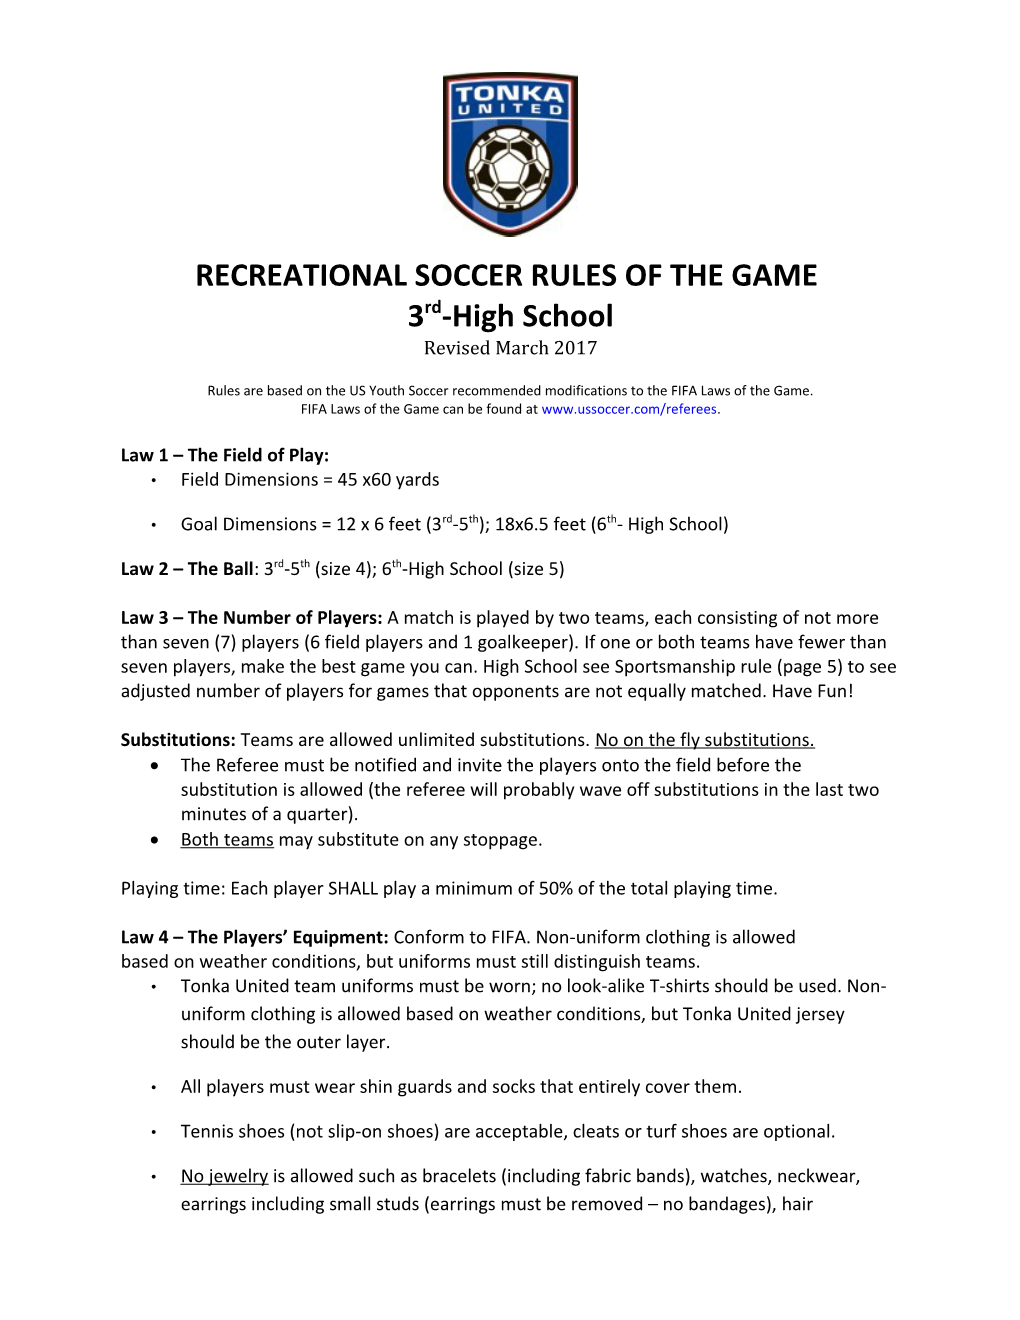 Recreational Soccer Rules of the Game